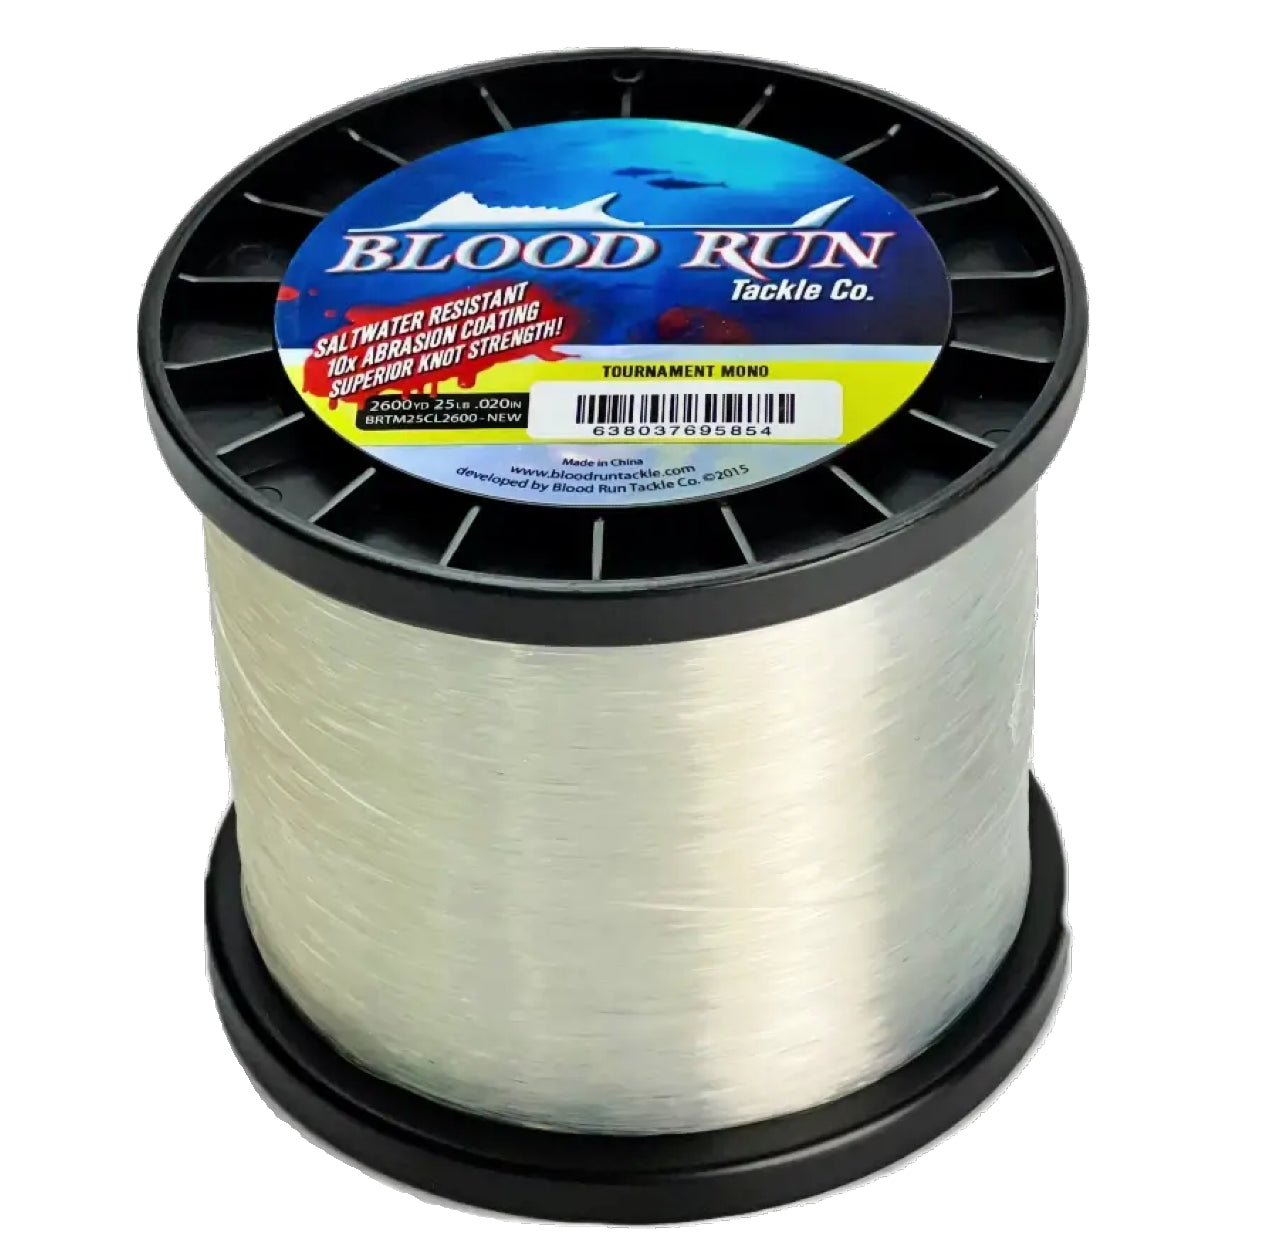 Offshore Trolling Tackle and Gear for Salmon Walleye and Striped Bass from Blood  Run Fishing